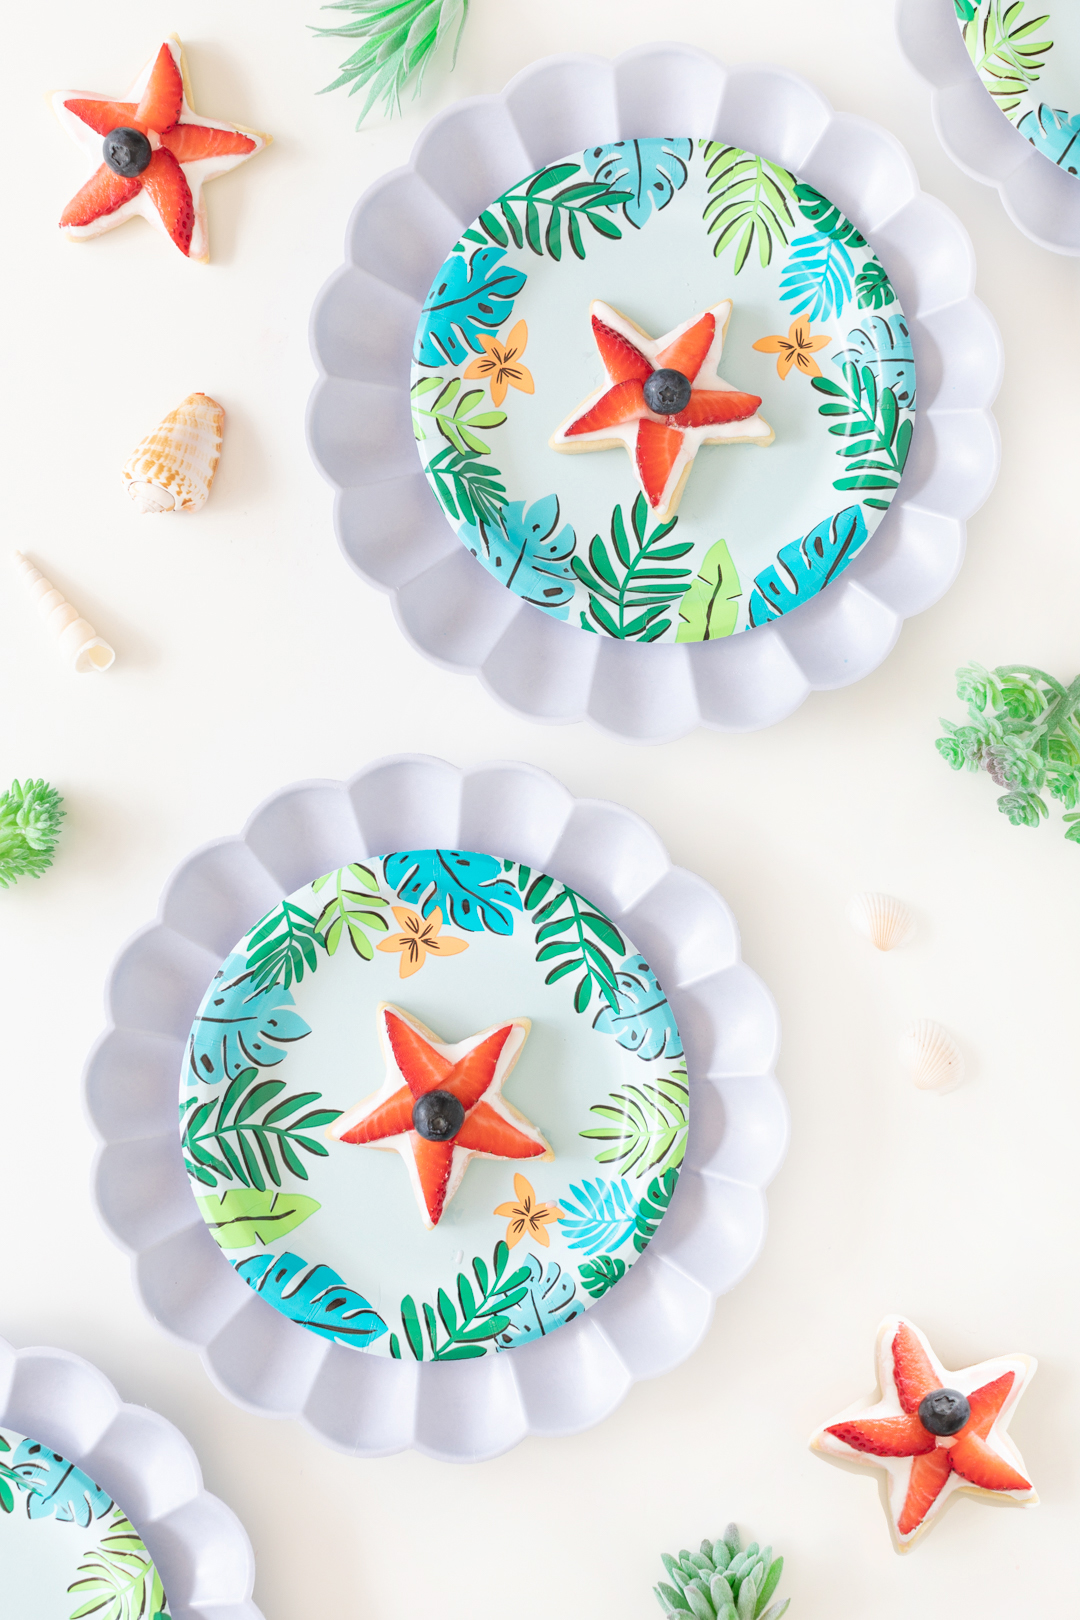 strawberry and blueberry star-shaped sugar cookies set out on cute tropical paper plates with a sea shell charger.